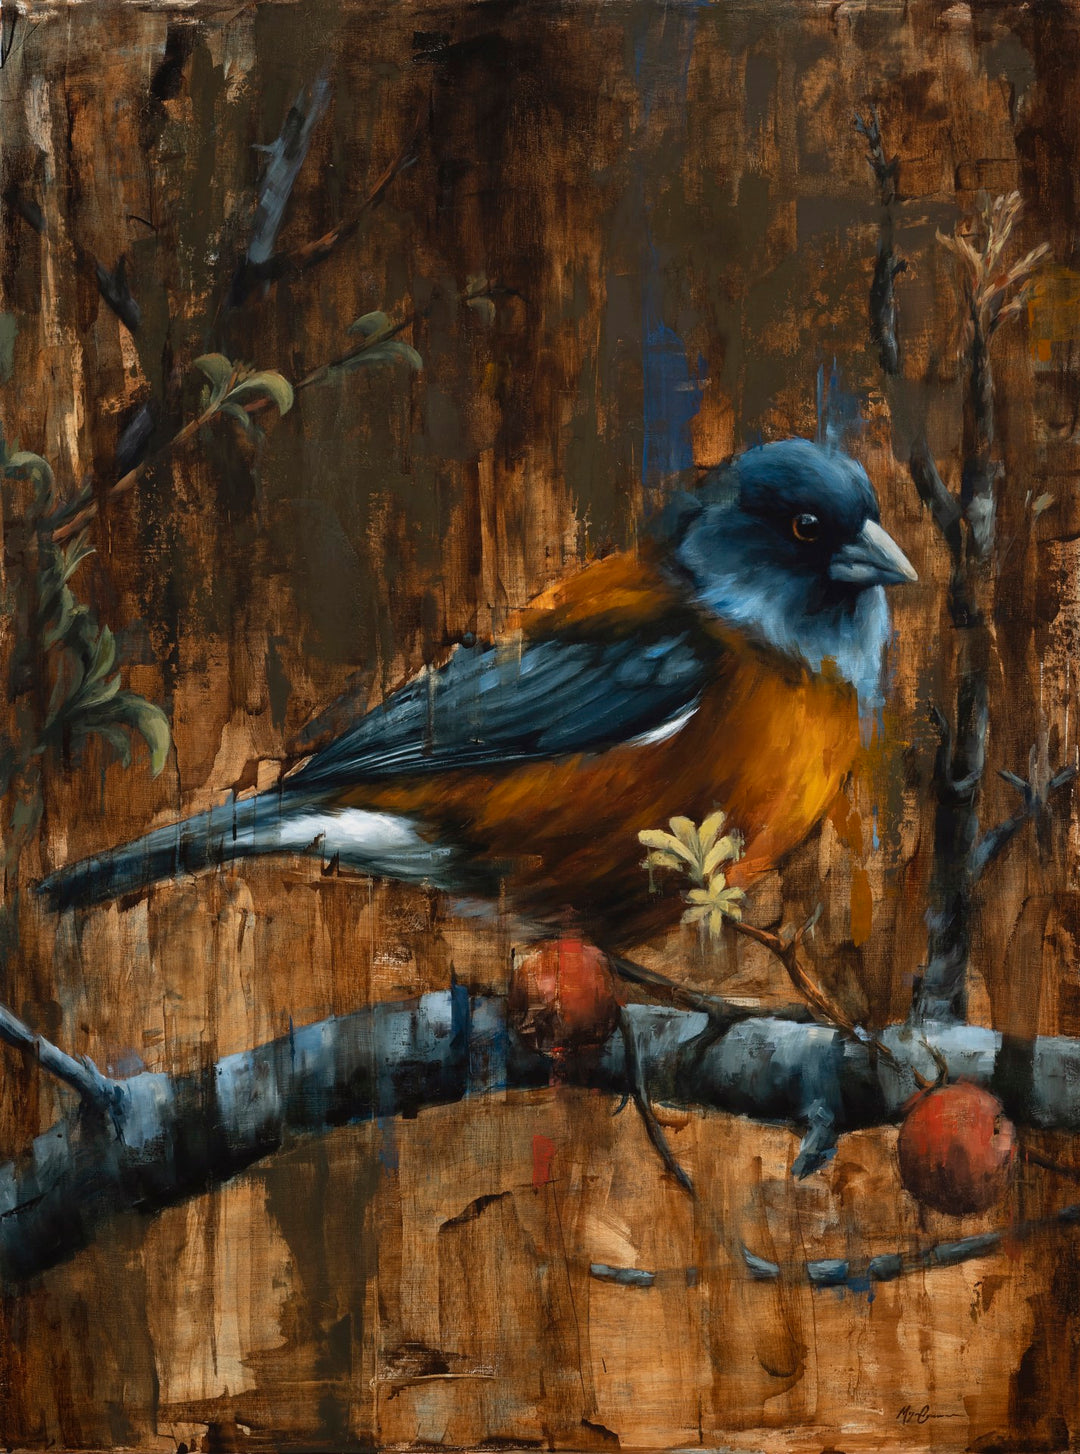 A painting of a bird artistically perched on a branch, beautifully captured in oil on panel, titled "Break From Flight, 2022" by Morgan Cameron.